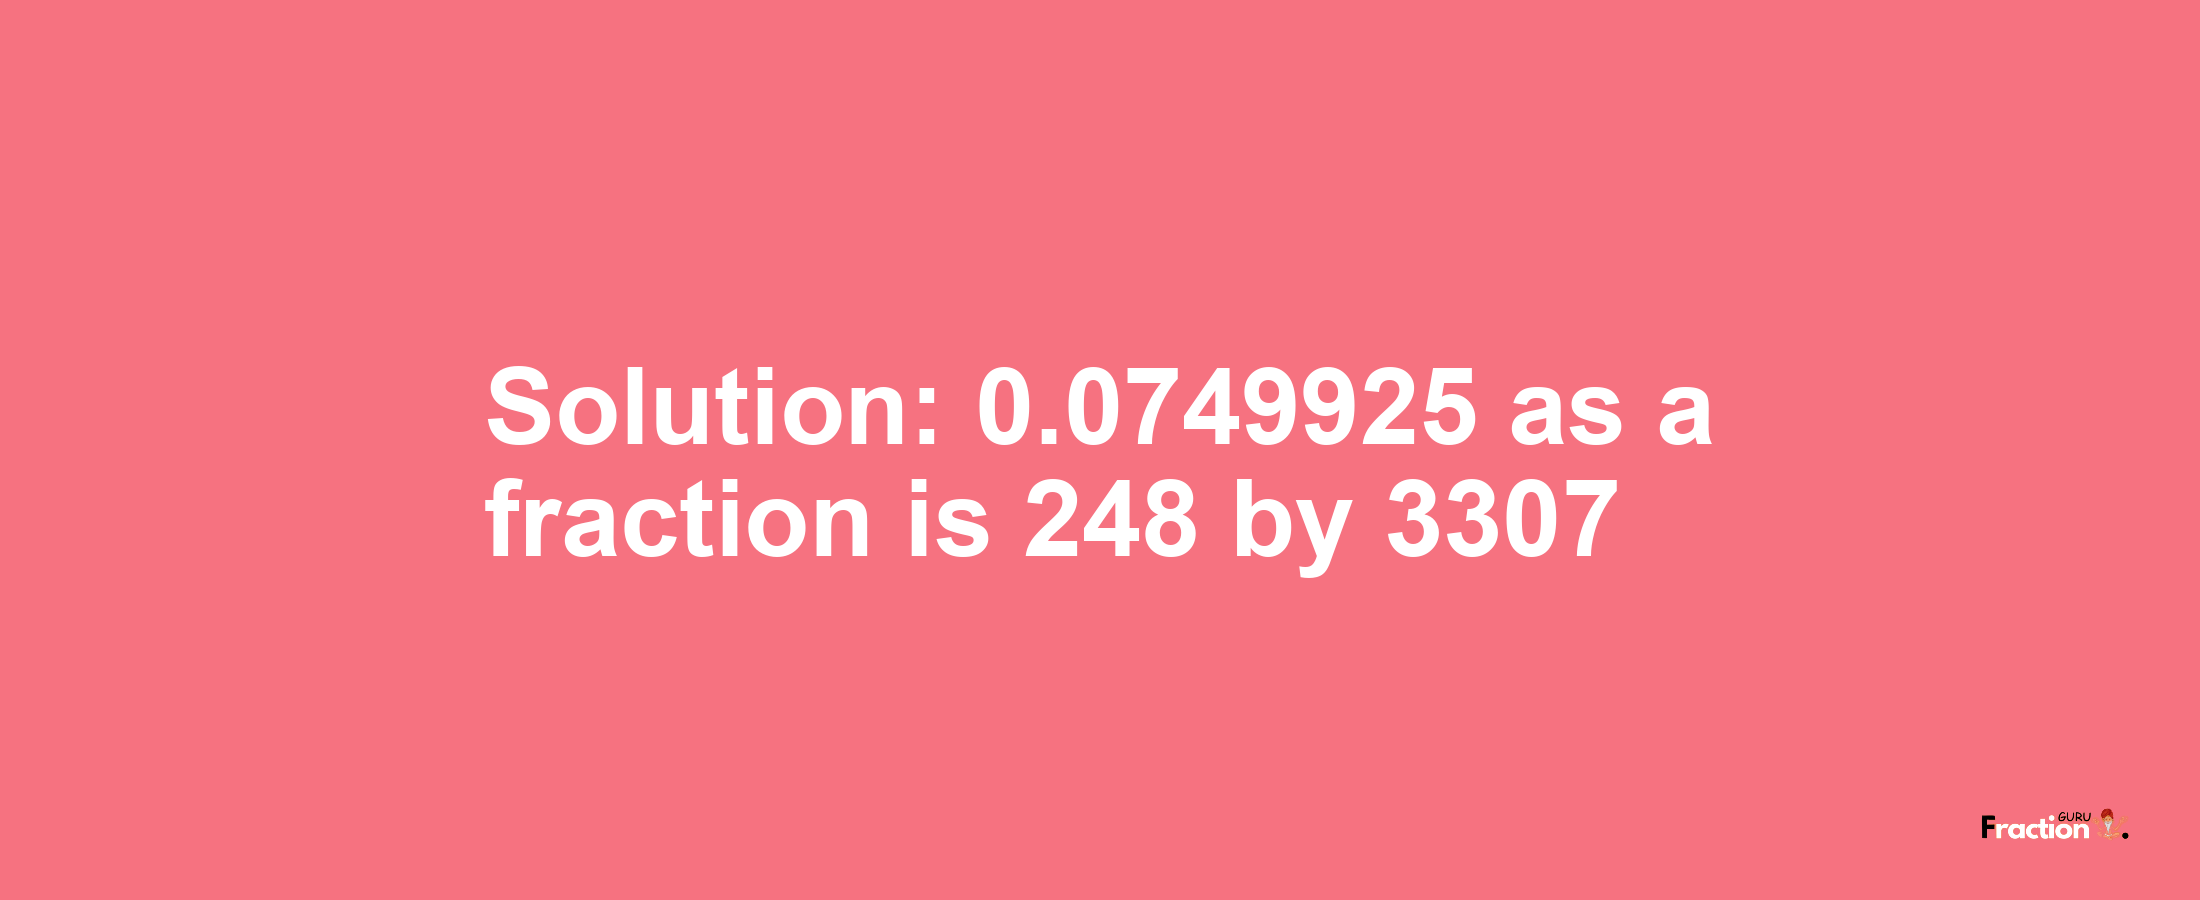 Solution:0.0749925 as a fraction is 248/3307